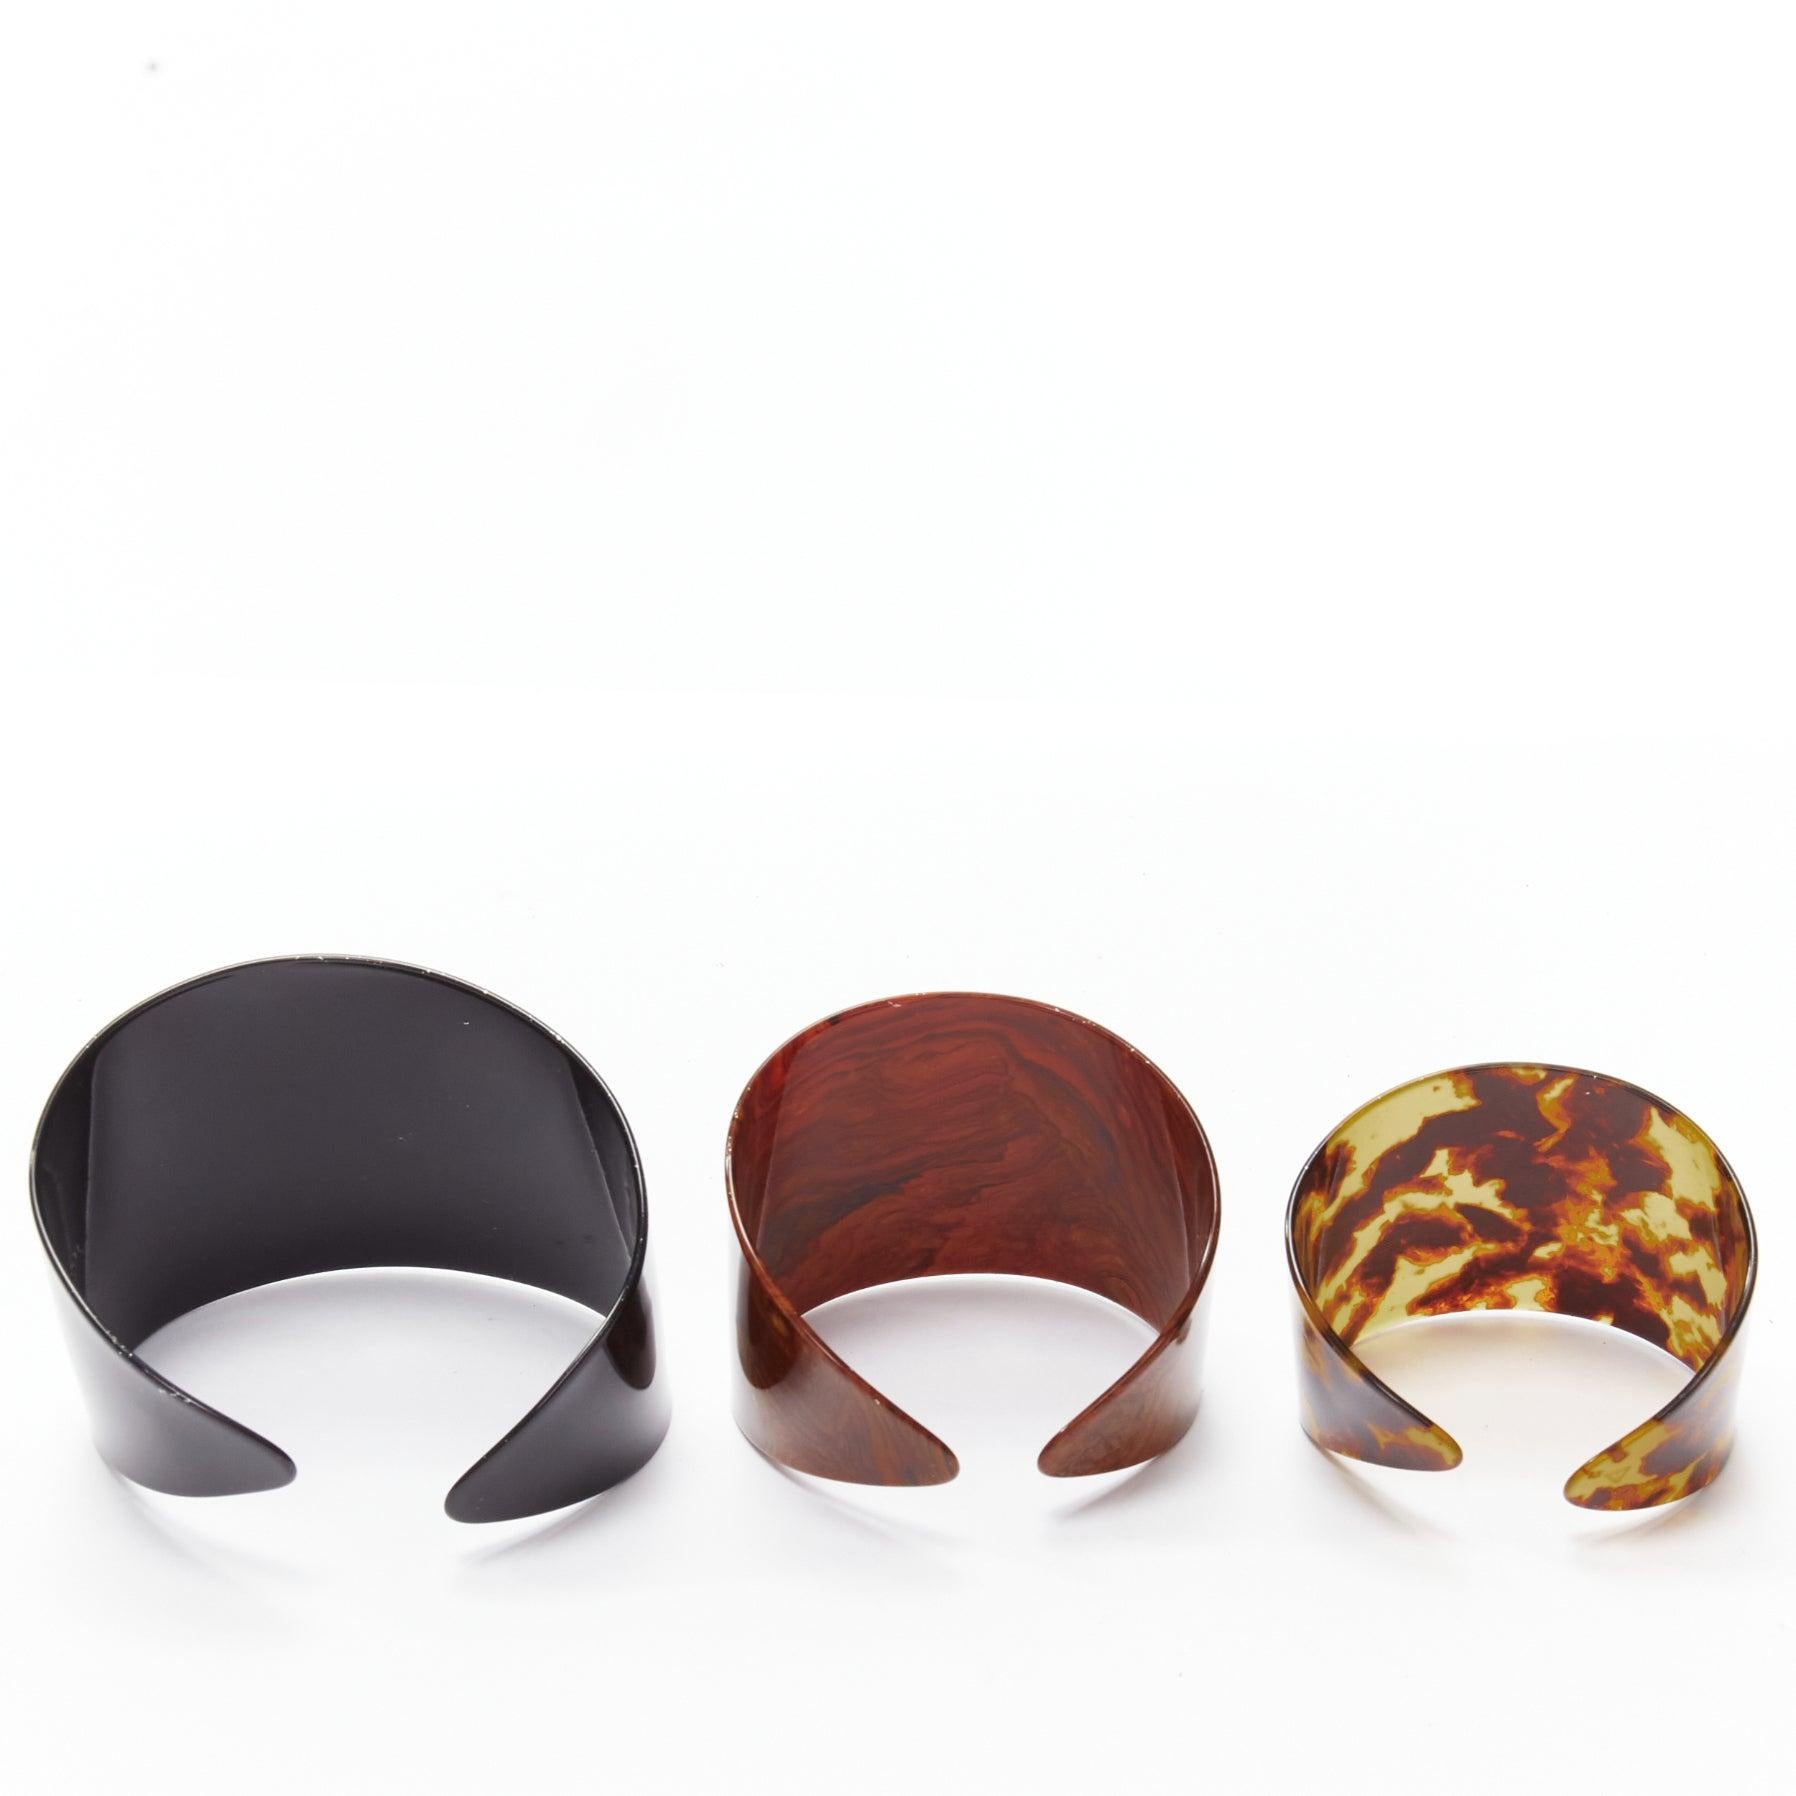 TOGA ARCHIVES brown black acrylic marble print oversized cuffs set
Reference: BSHW/A00084
Brand: Toga Archives
Material: Acrylic
Color: Black, Brown
Pattern: Marble
Closure: Pull On
Lining: Black Acrylic
Extra Details: Intended be stacked on one arm